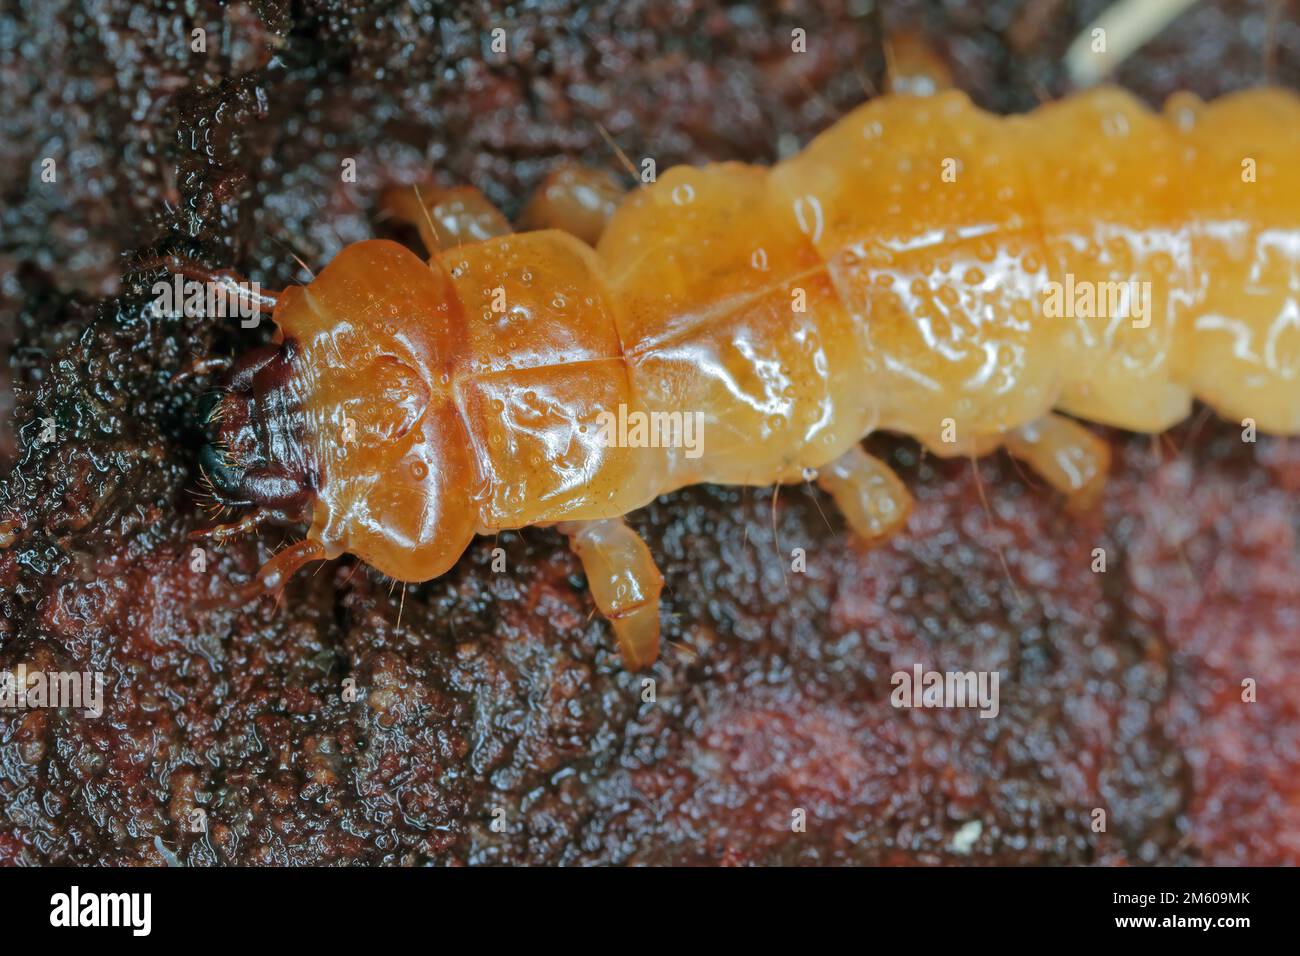 Black-headed cardinal beetle larva (Pyrochroa coccinea), a flattened saprophytic larva found in decaying wood. Stock Photo